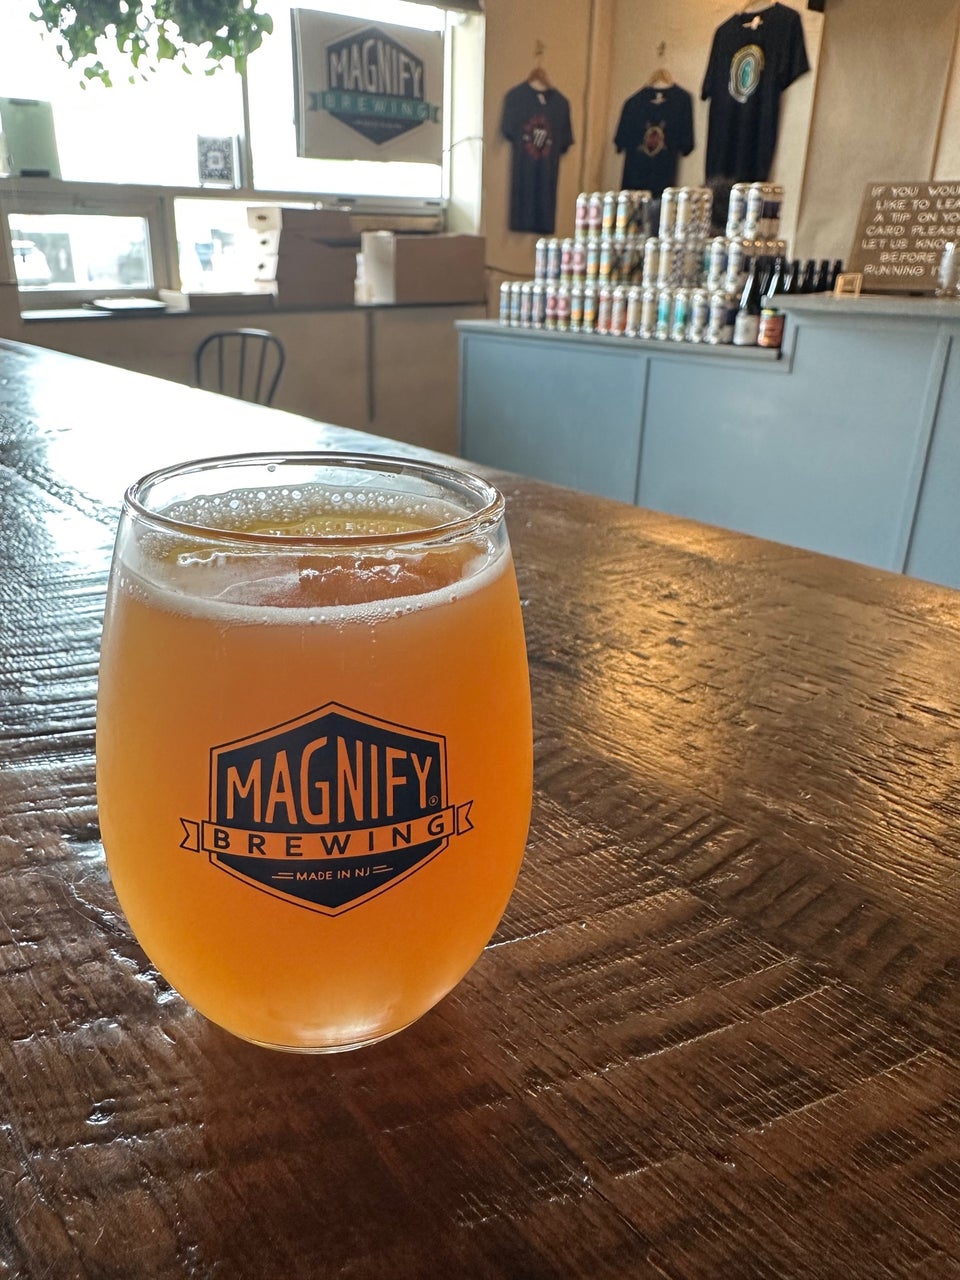 Magnify Brewing Company